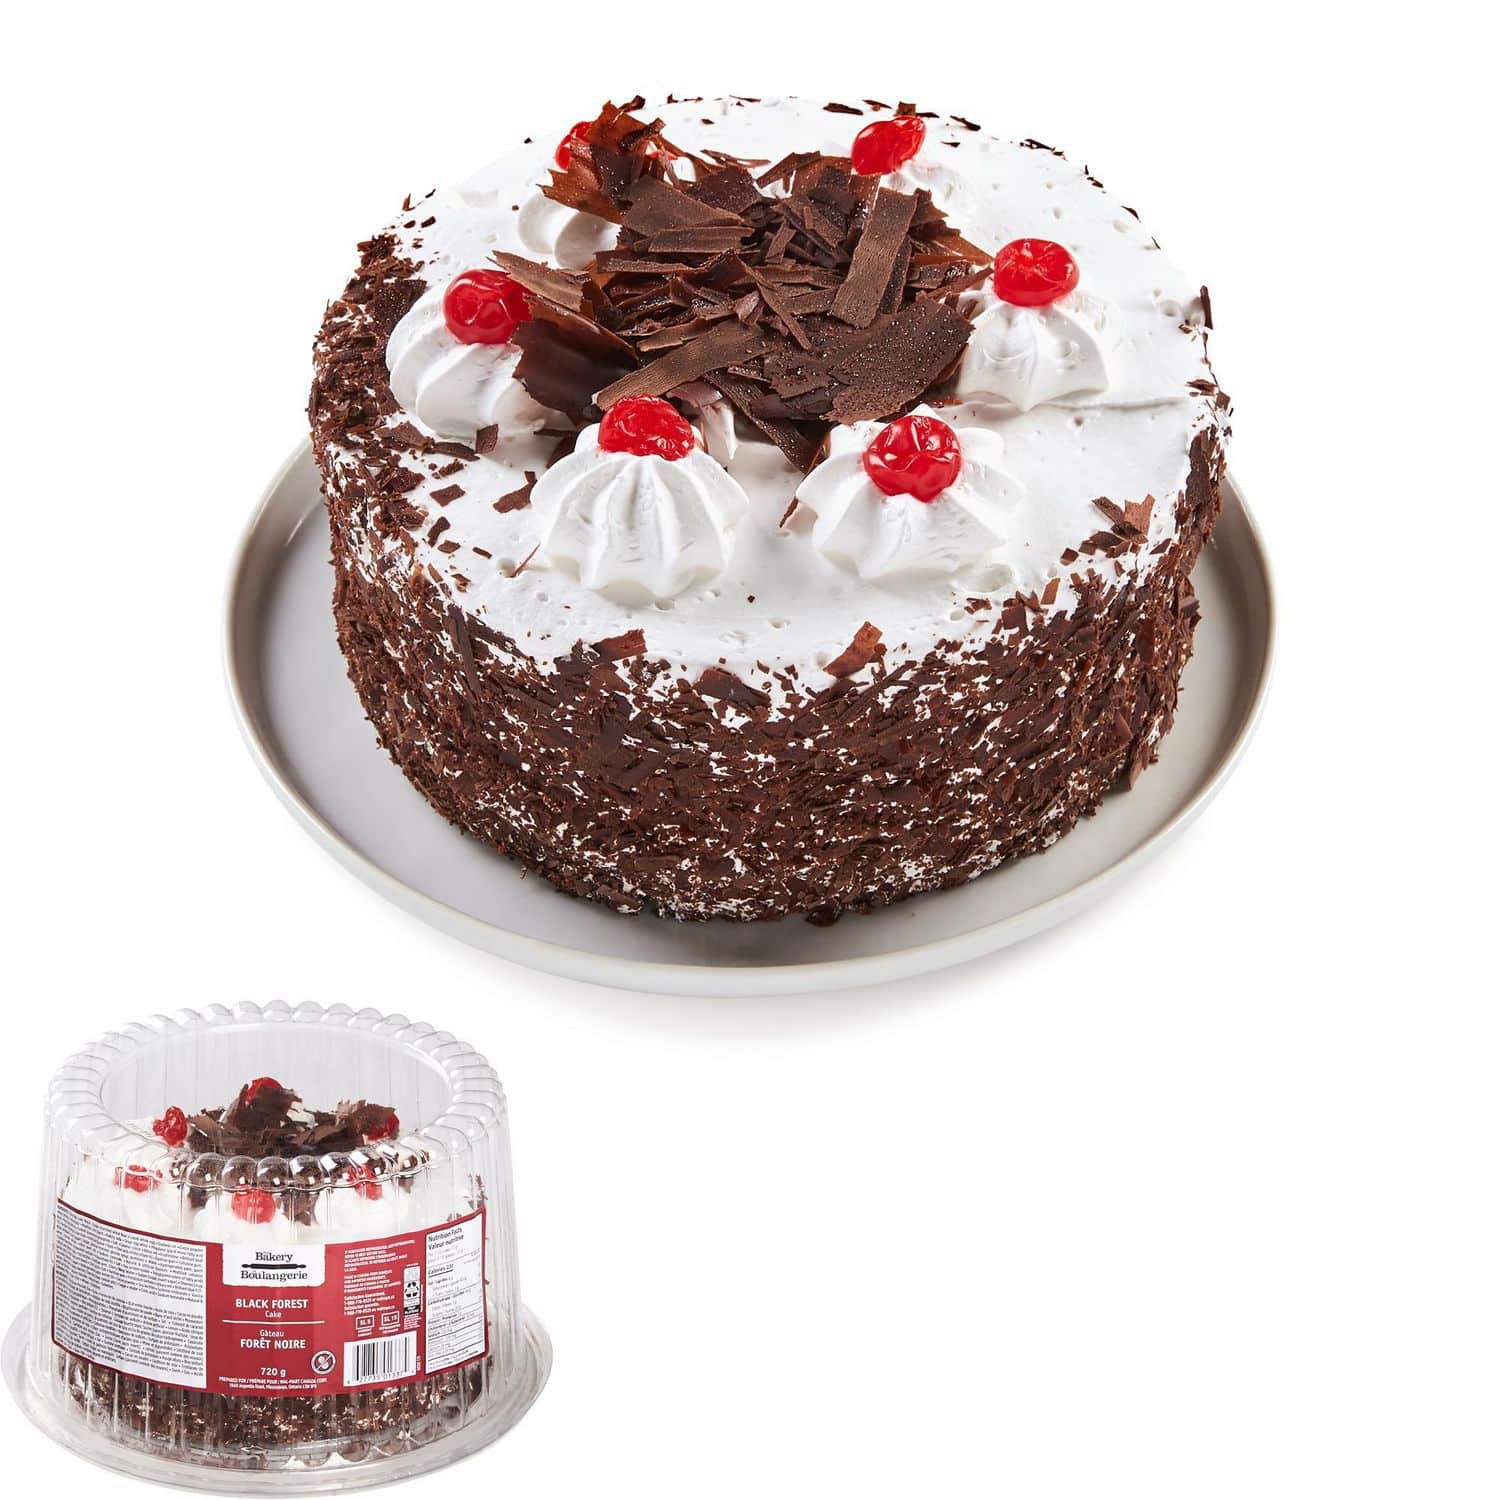 The Bakery Black Forest Cake